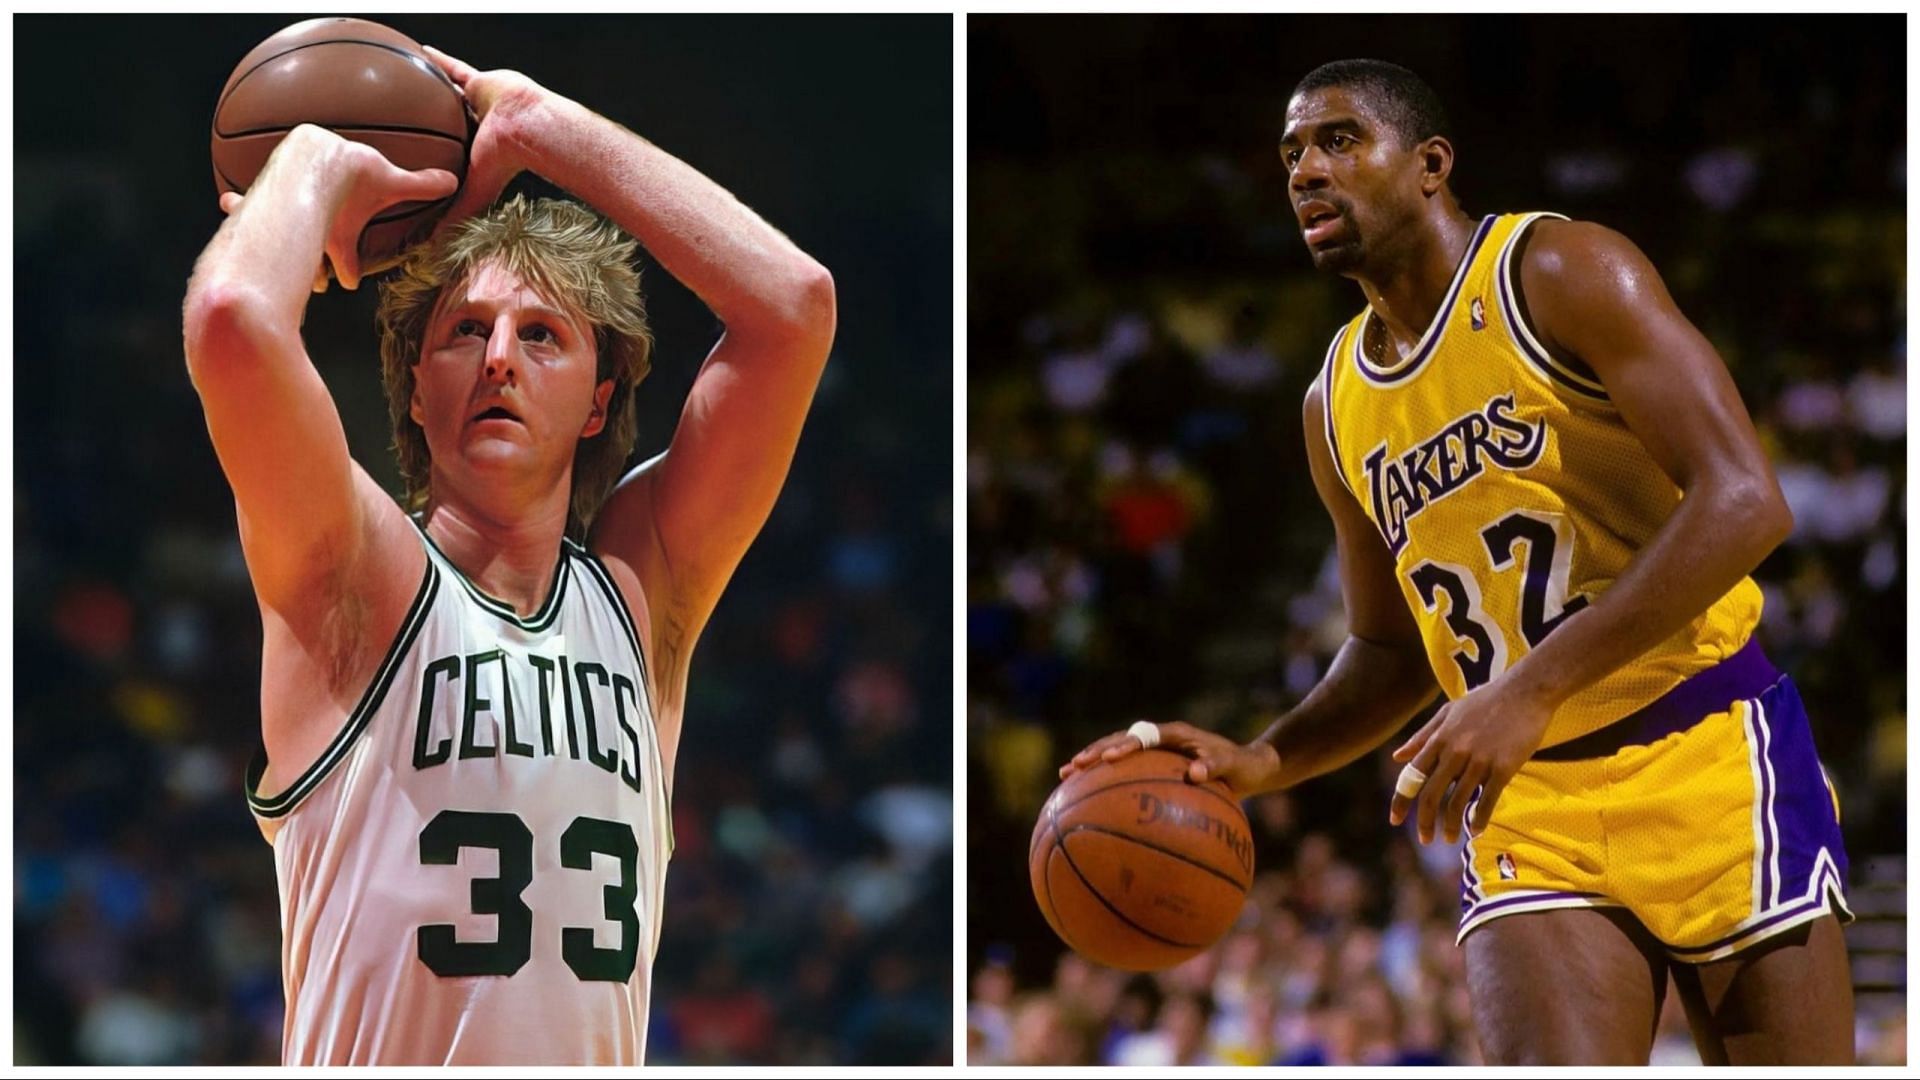 Larry Bird looks back on disappointing loss to Magic Johnson during 1979 NCAA Finals game